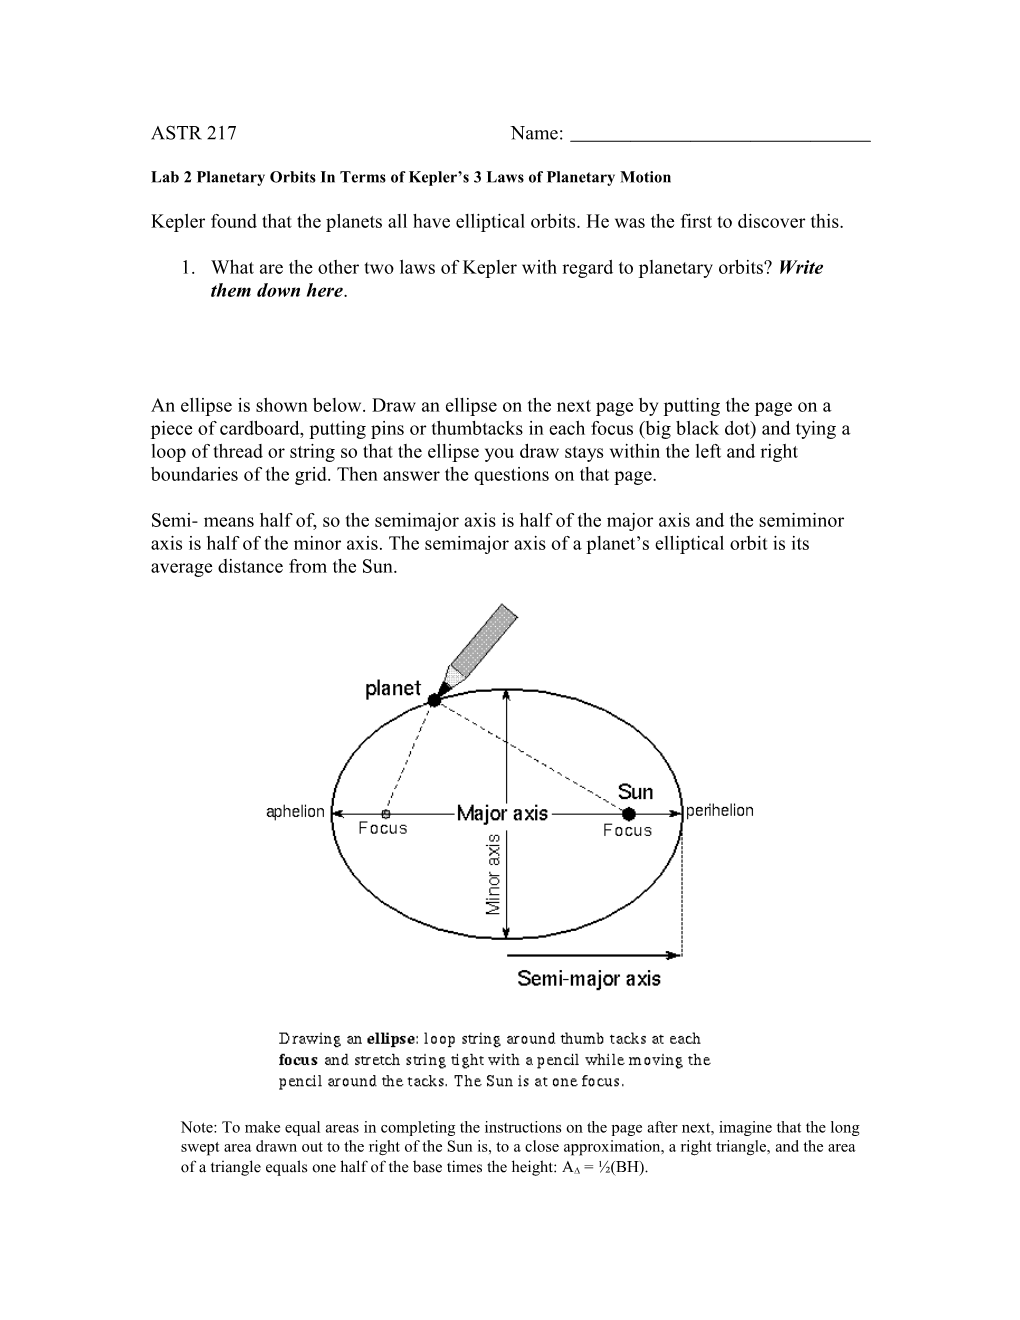 Lab 2 Planetary Orbits in Terms of Kepler S 3 Laws of Planetary Motion